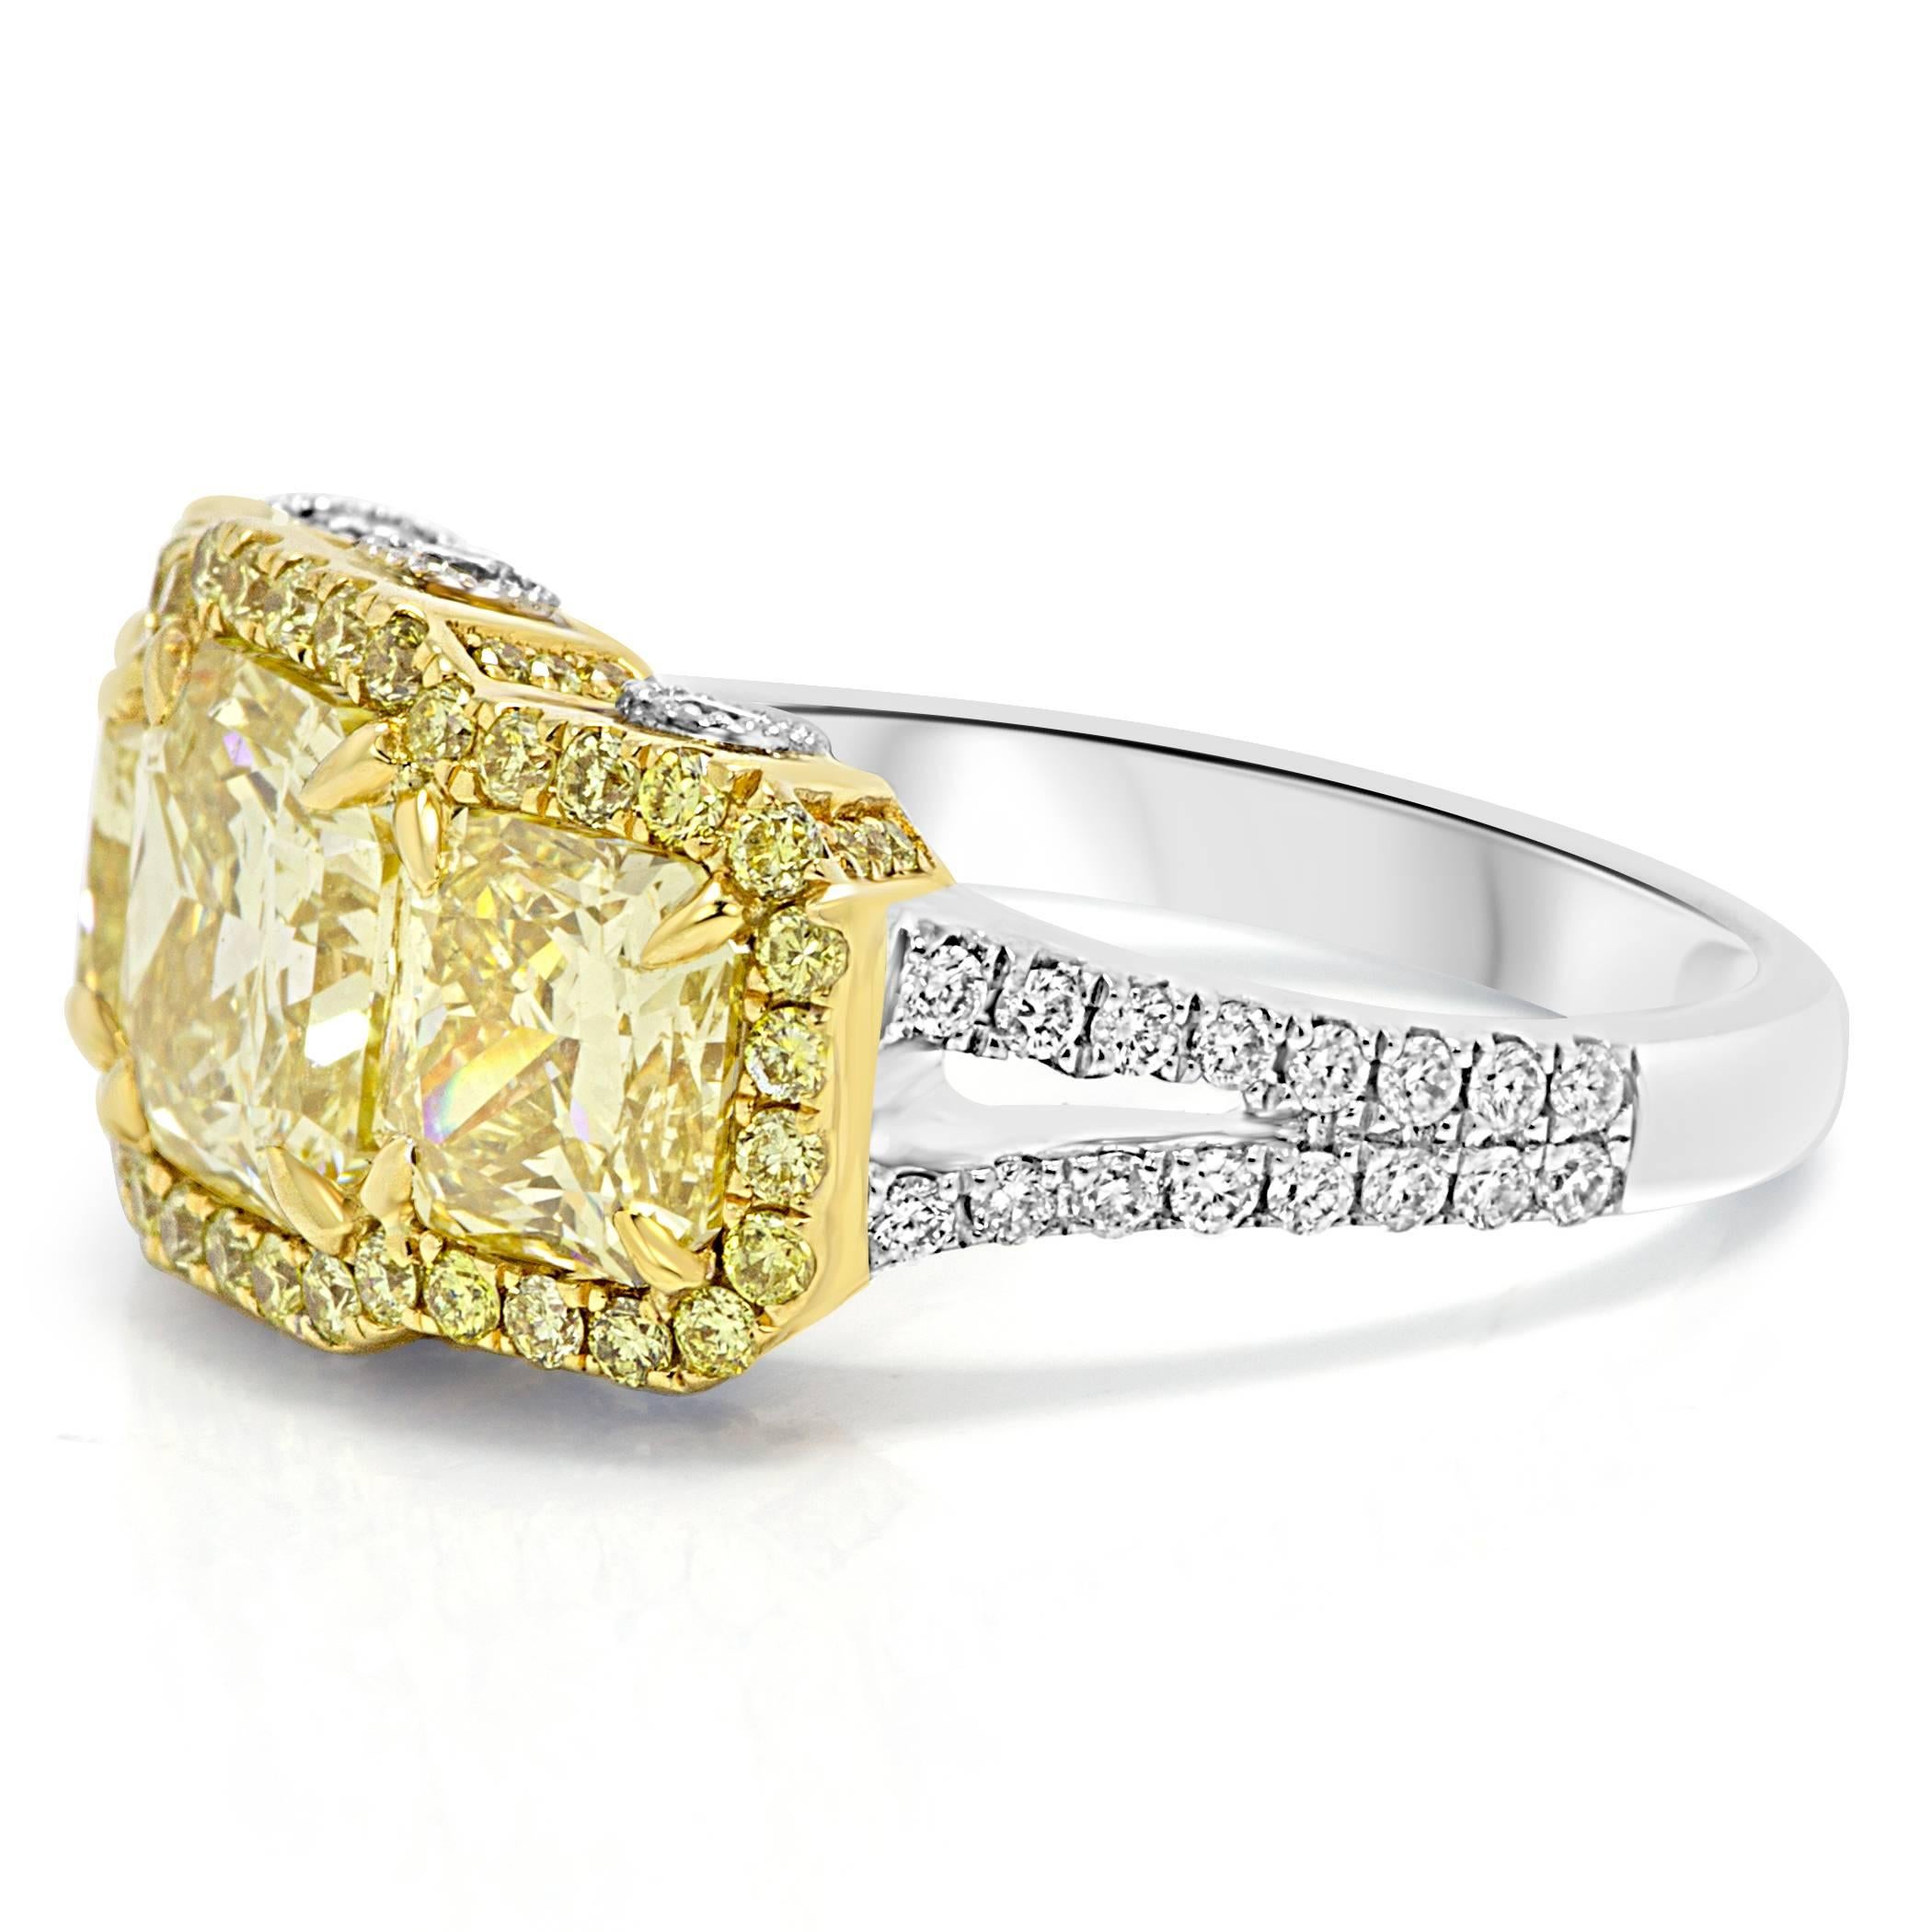 Gorgeous one of a kind 1 Natural Fancy Yellow Radiant cut Diamond 2.06 Carat Flanked by 2 Natural Fancy Yellow Diamond 2.14 Carat encircled in a single Halo of natural fancy yellow round Diamonds 0.44 Carat, with white diamond rounds on the shank